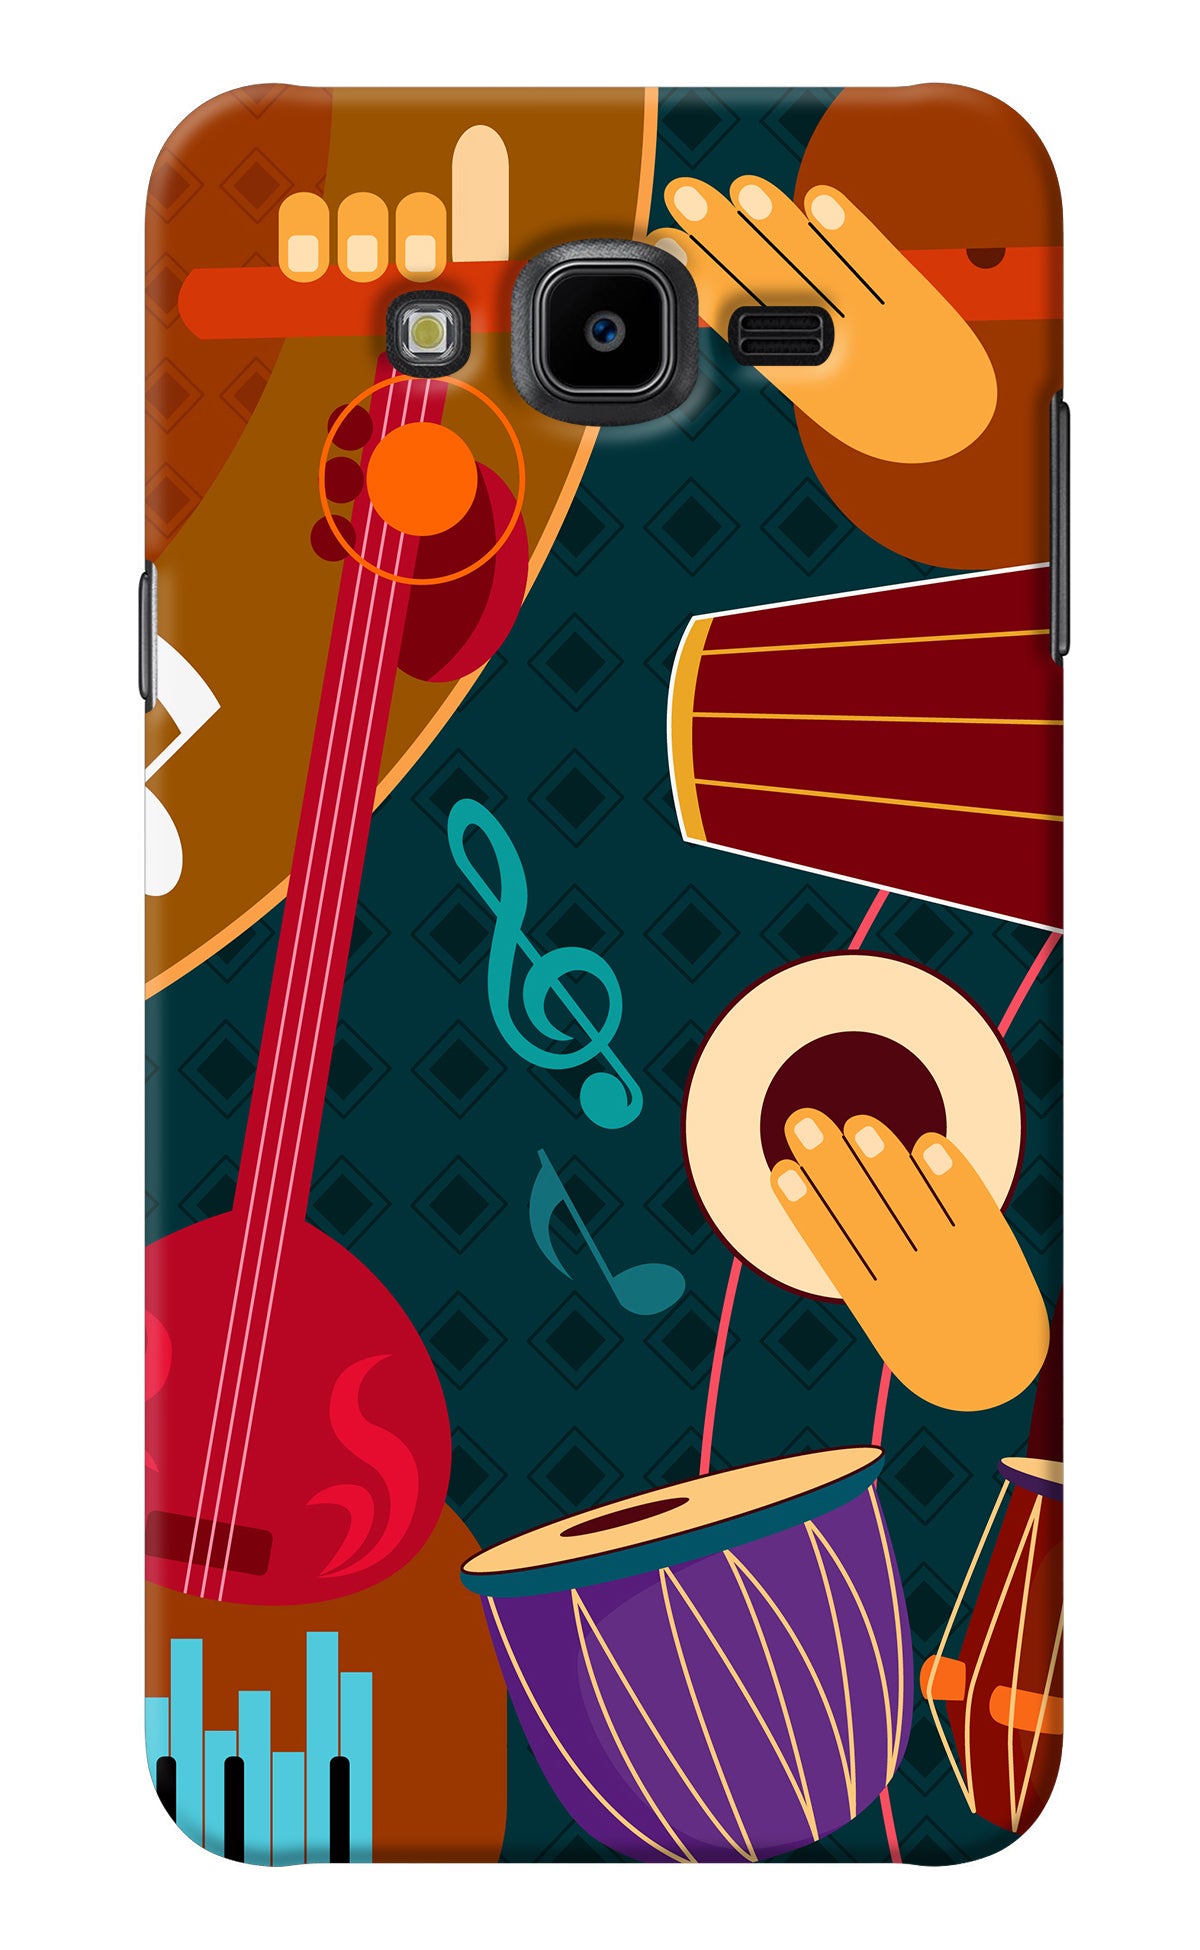 Music Instrument Samsung J7 Nxt Back Cover